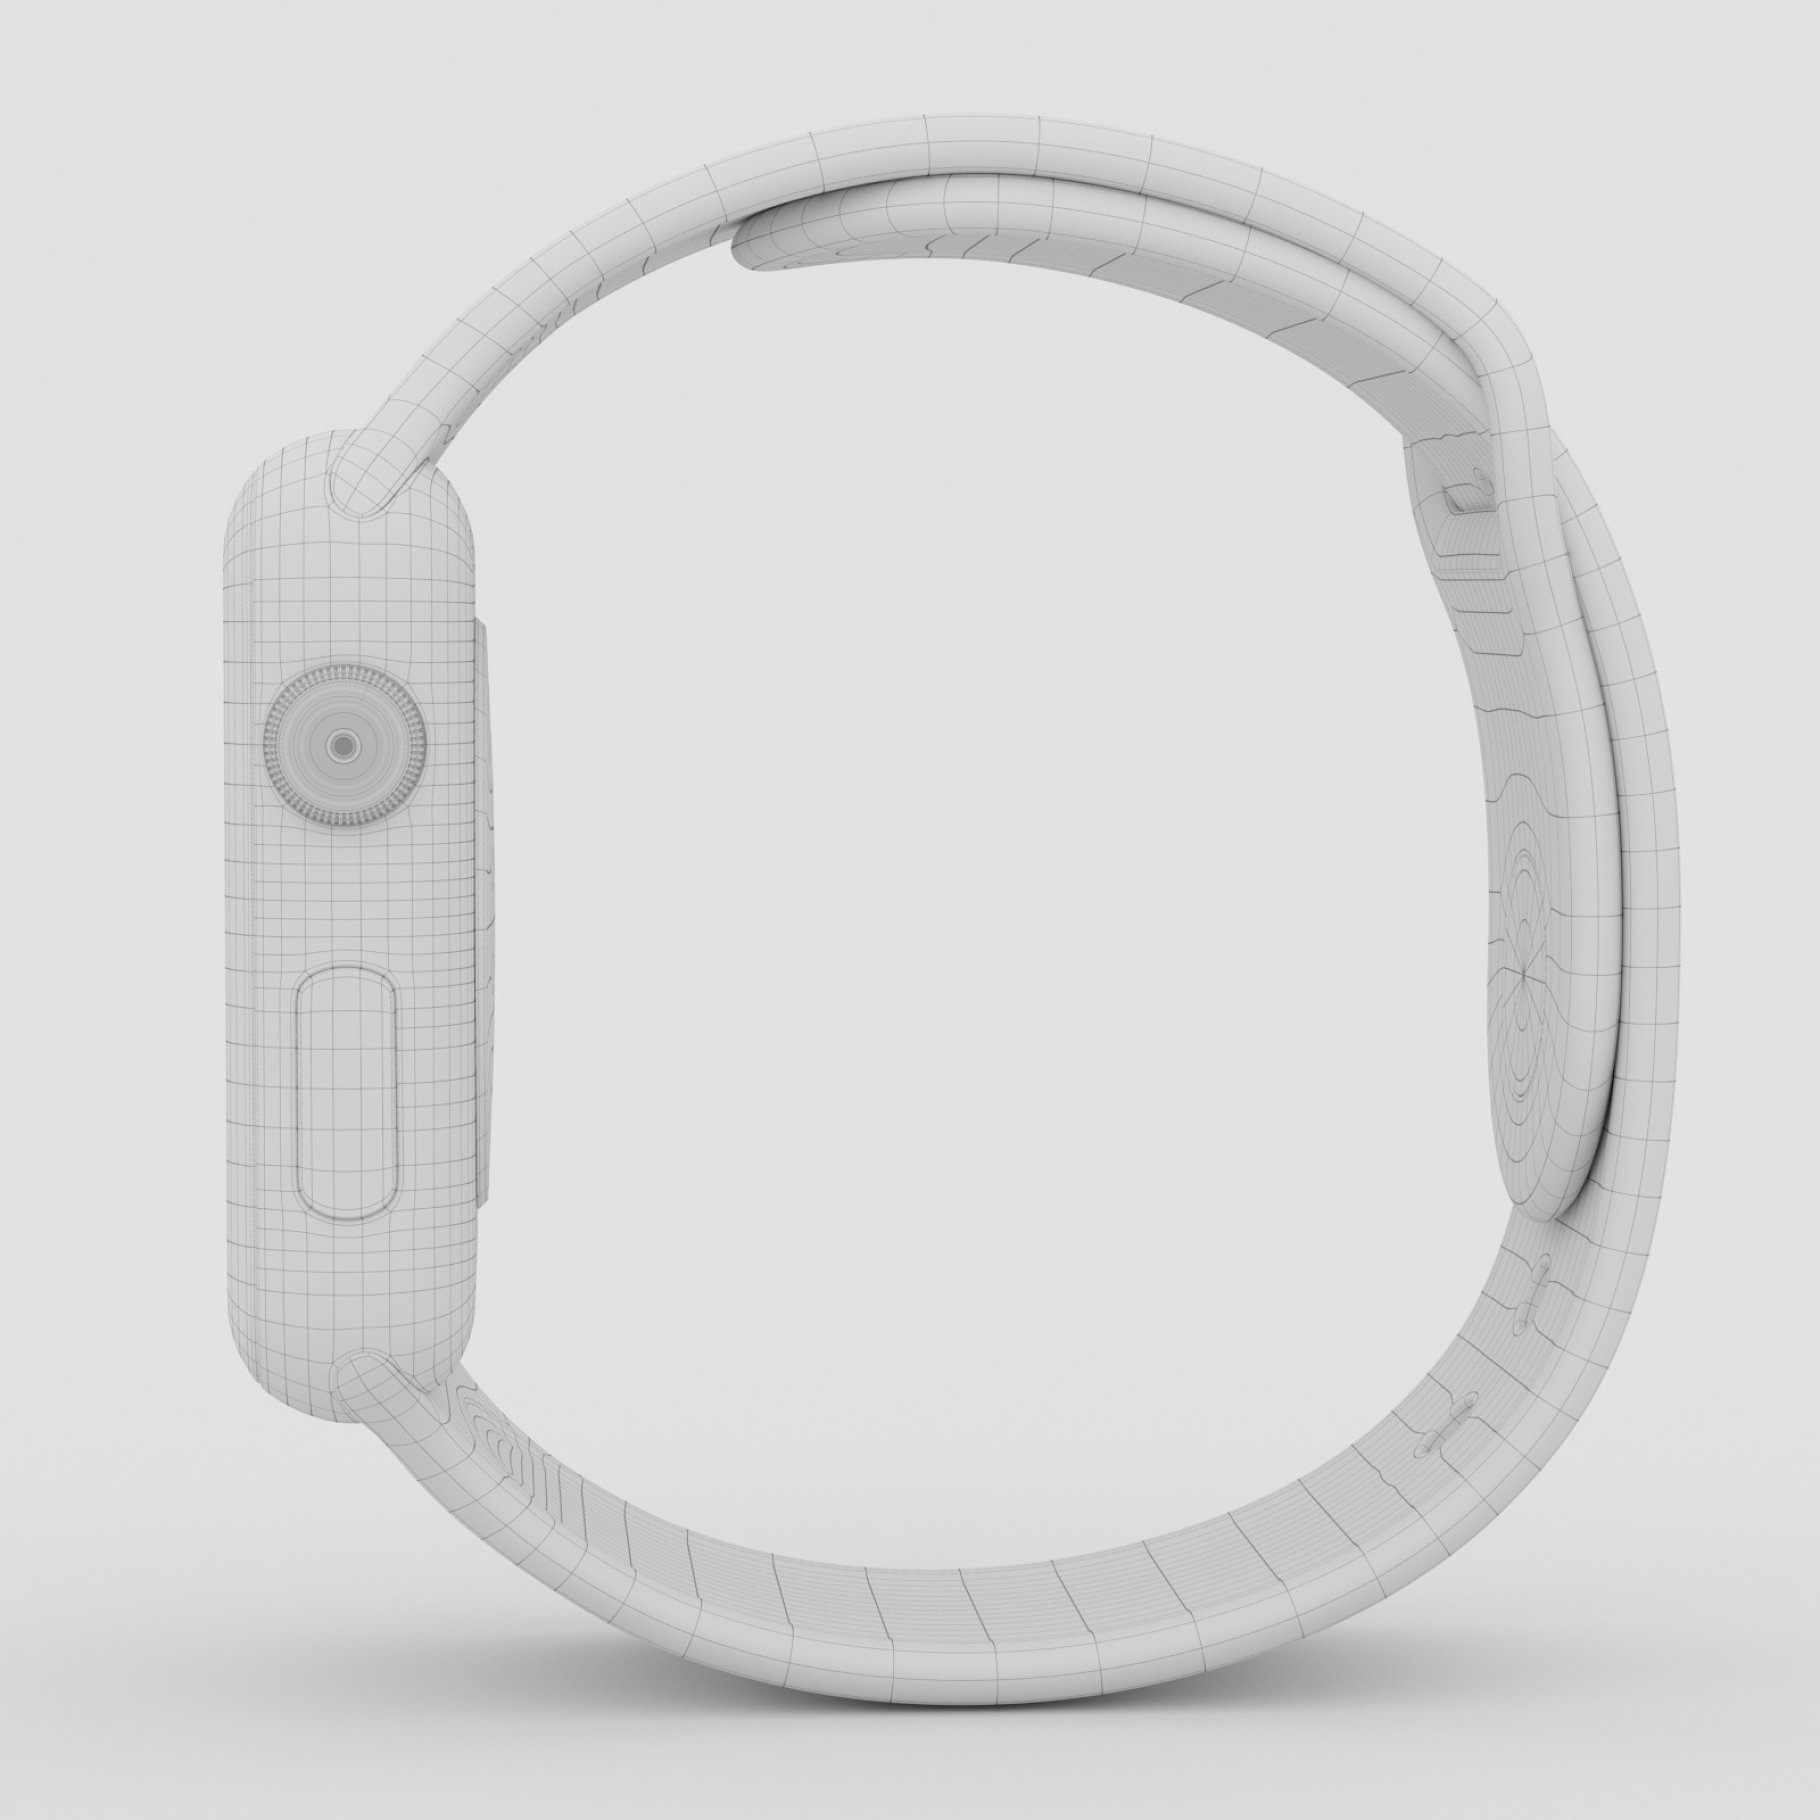 Various templates and smartwatches.